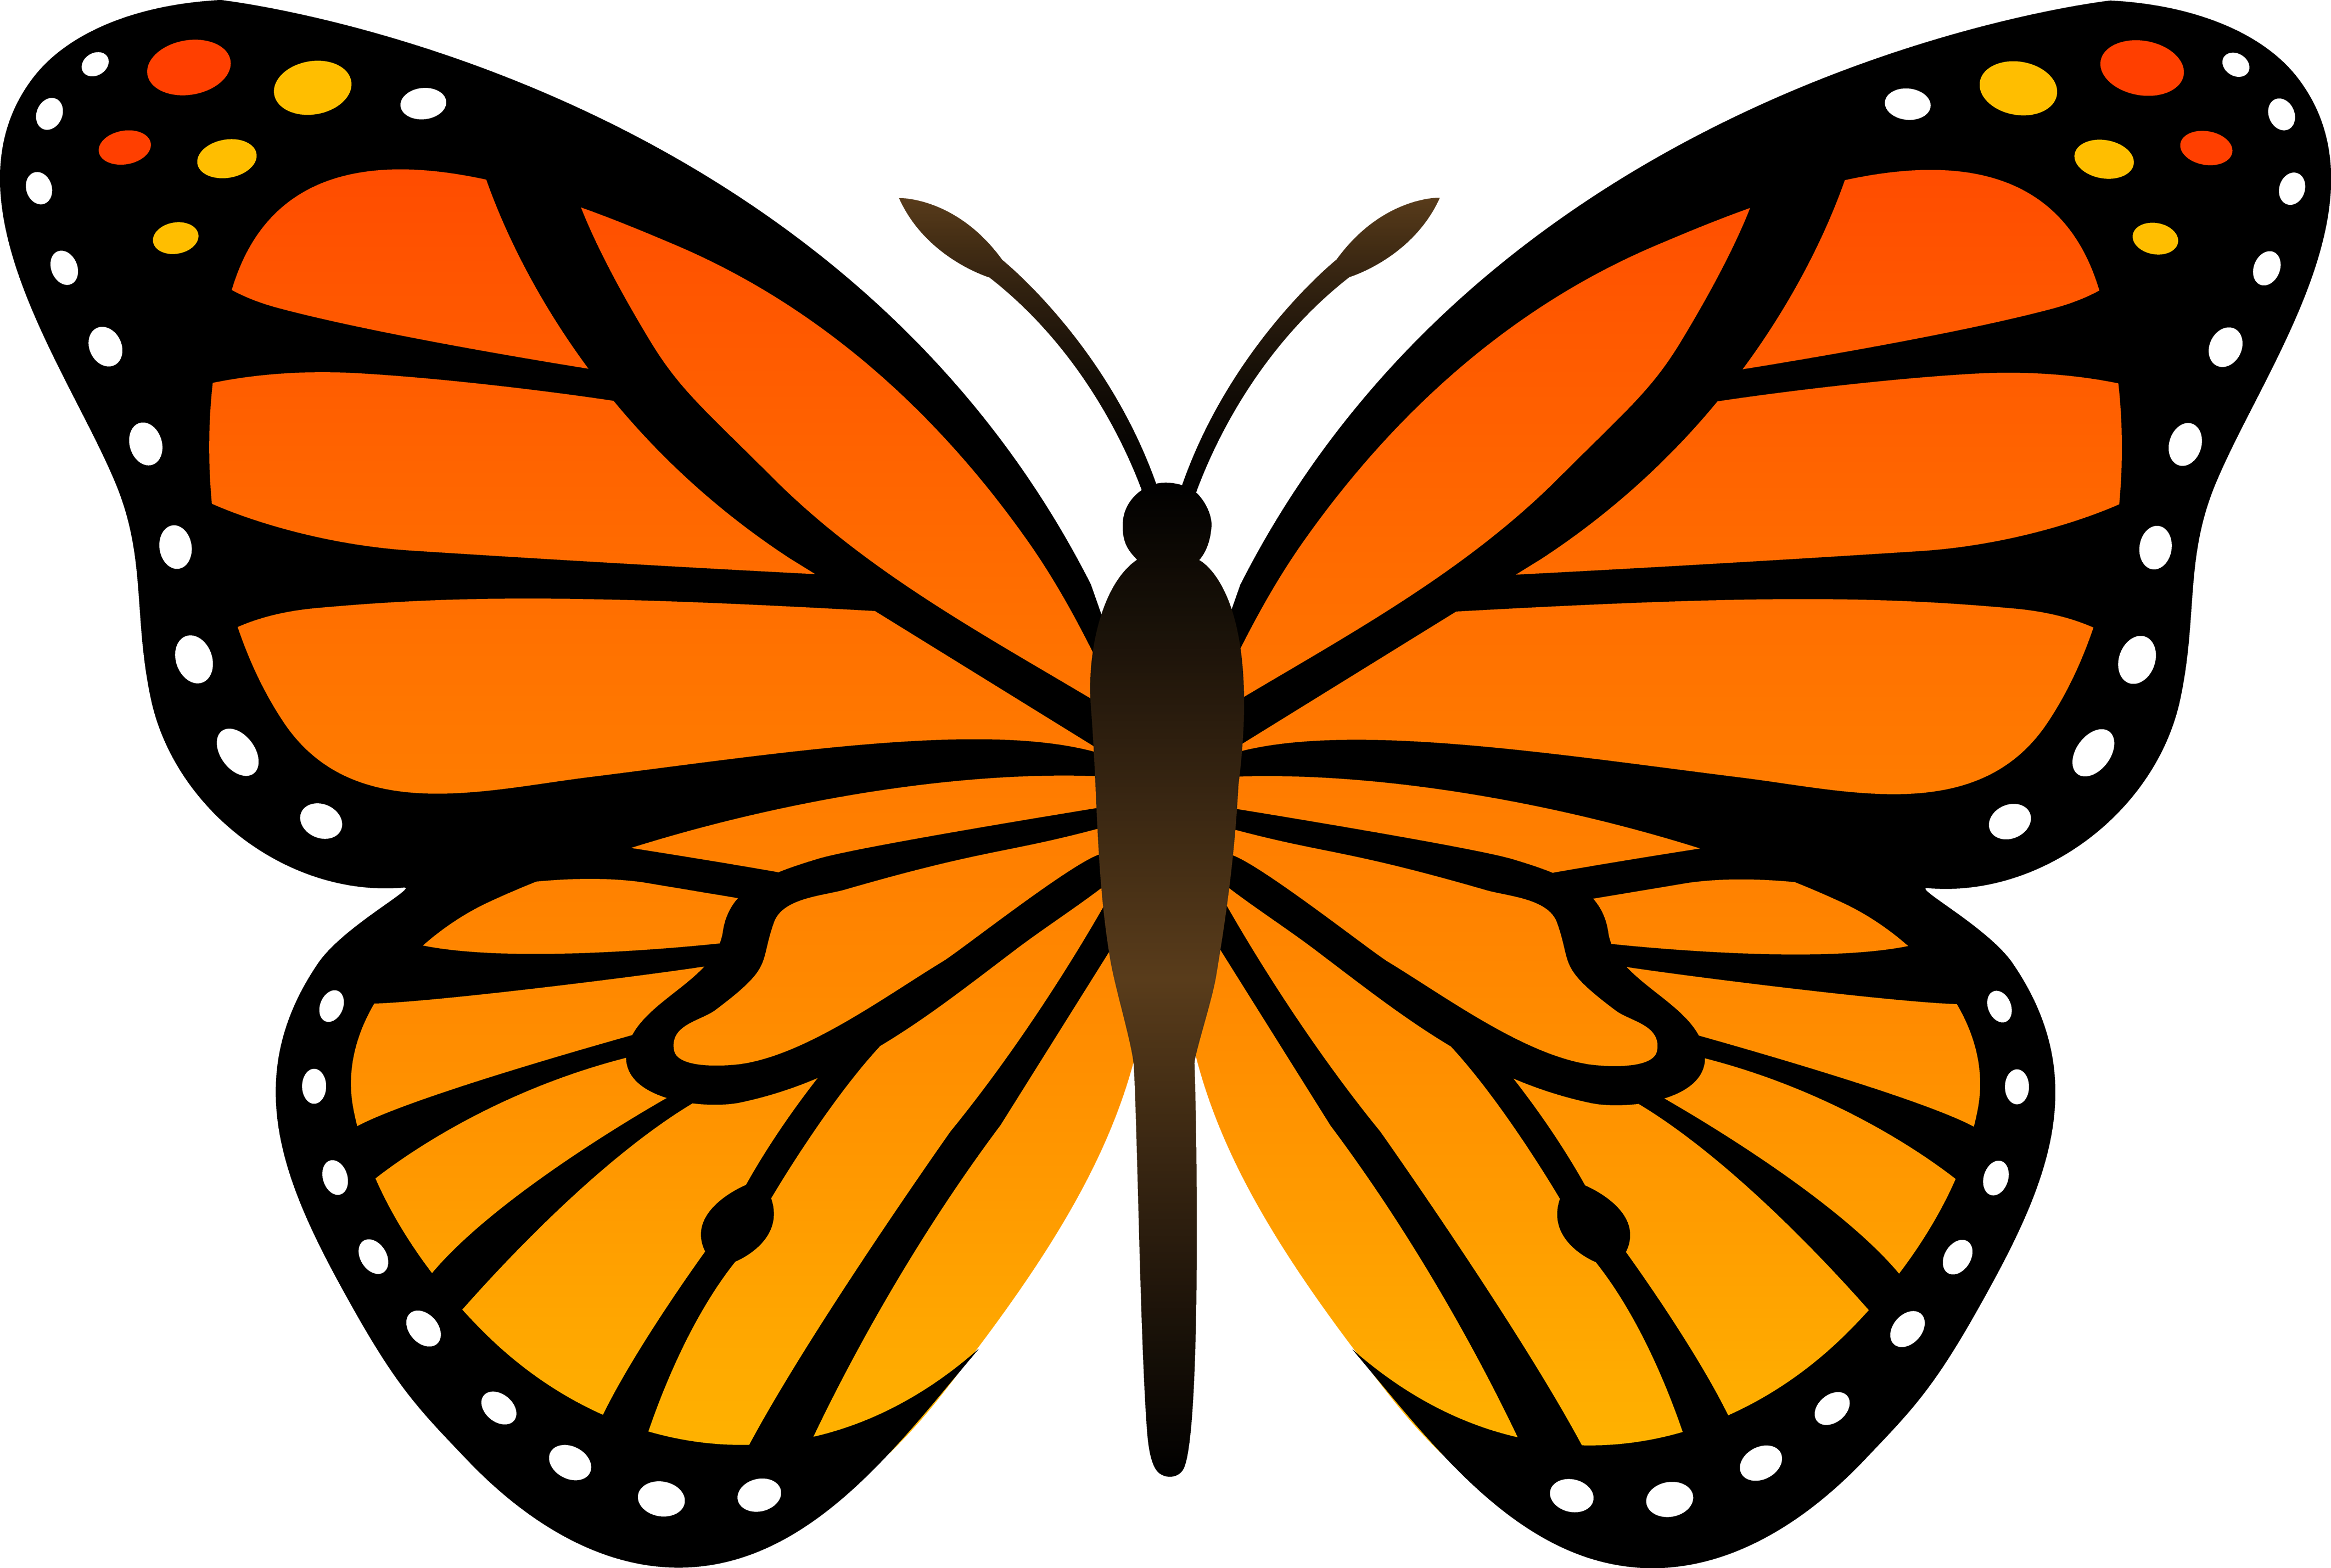 Download Cartoon Butterfly HQ PNG Image | FreePNGImg